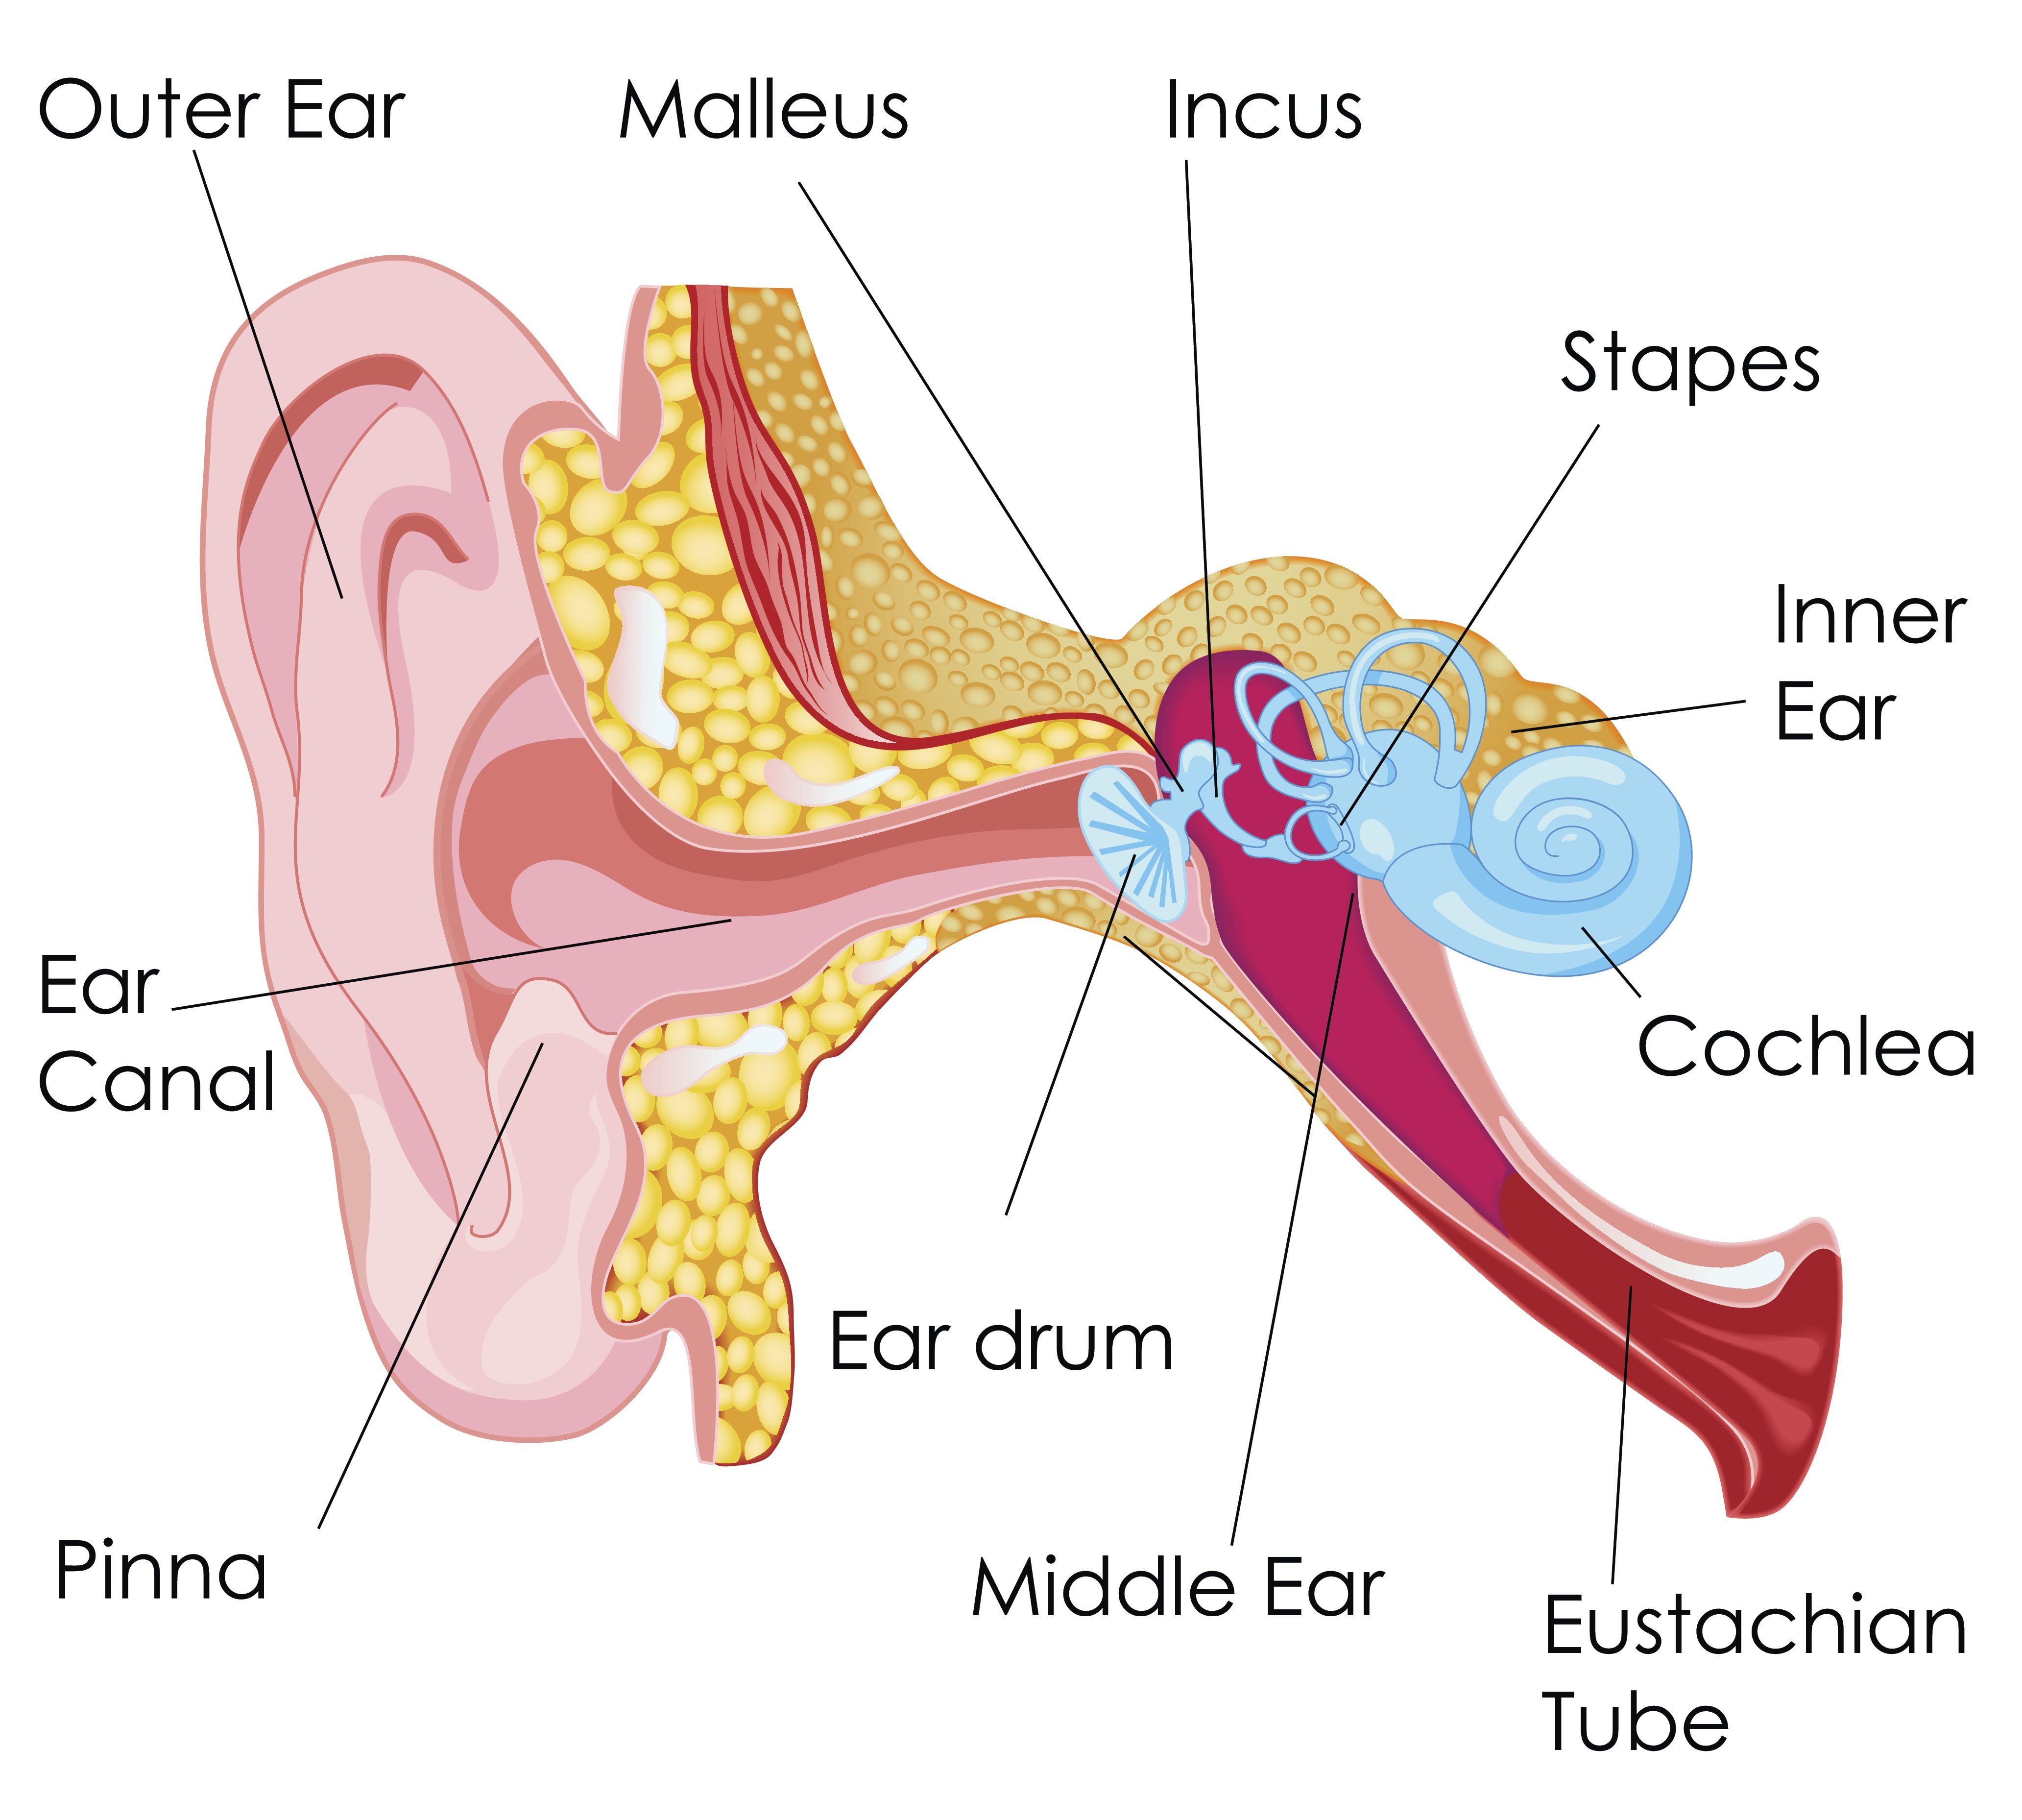 Demystifying the Ear Canal: Consider Professional Ear Cleaning